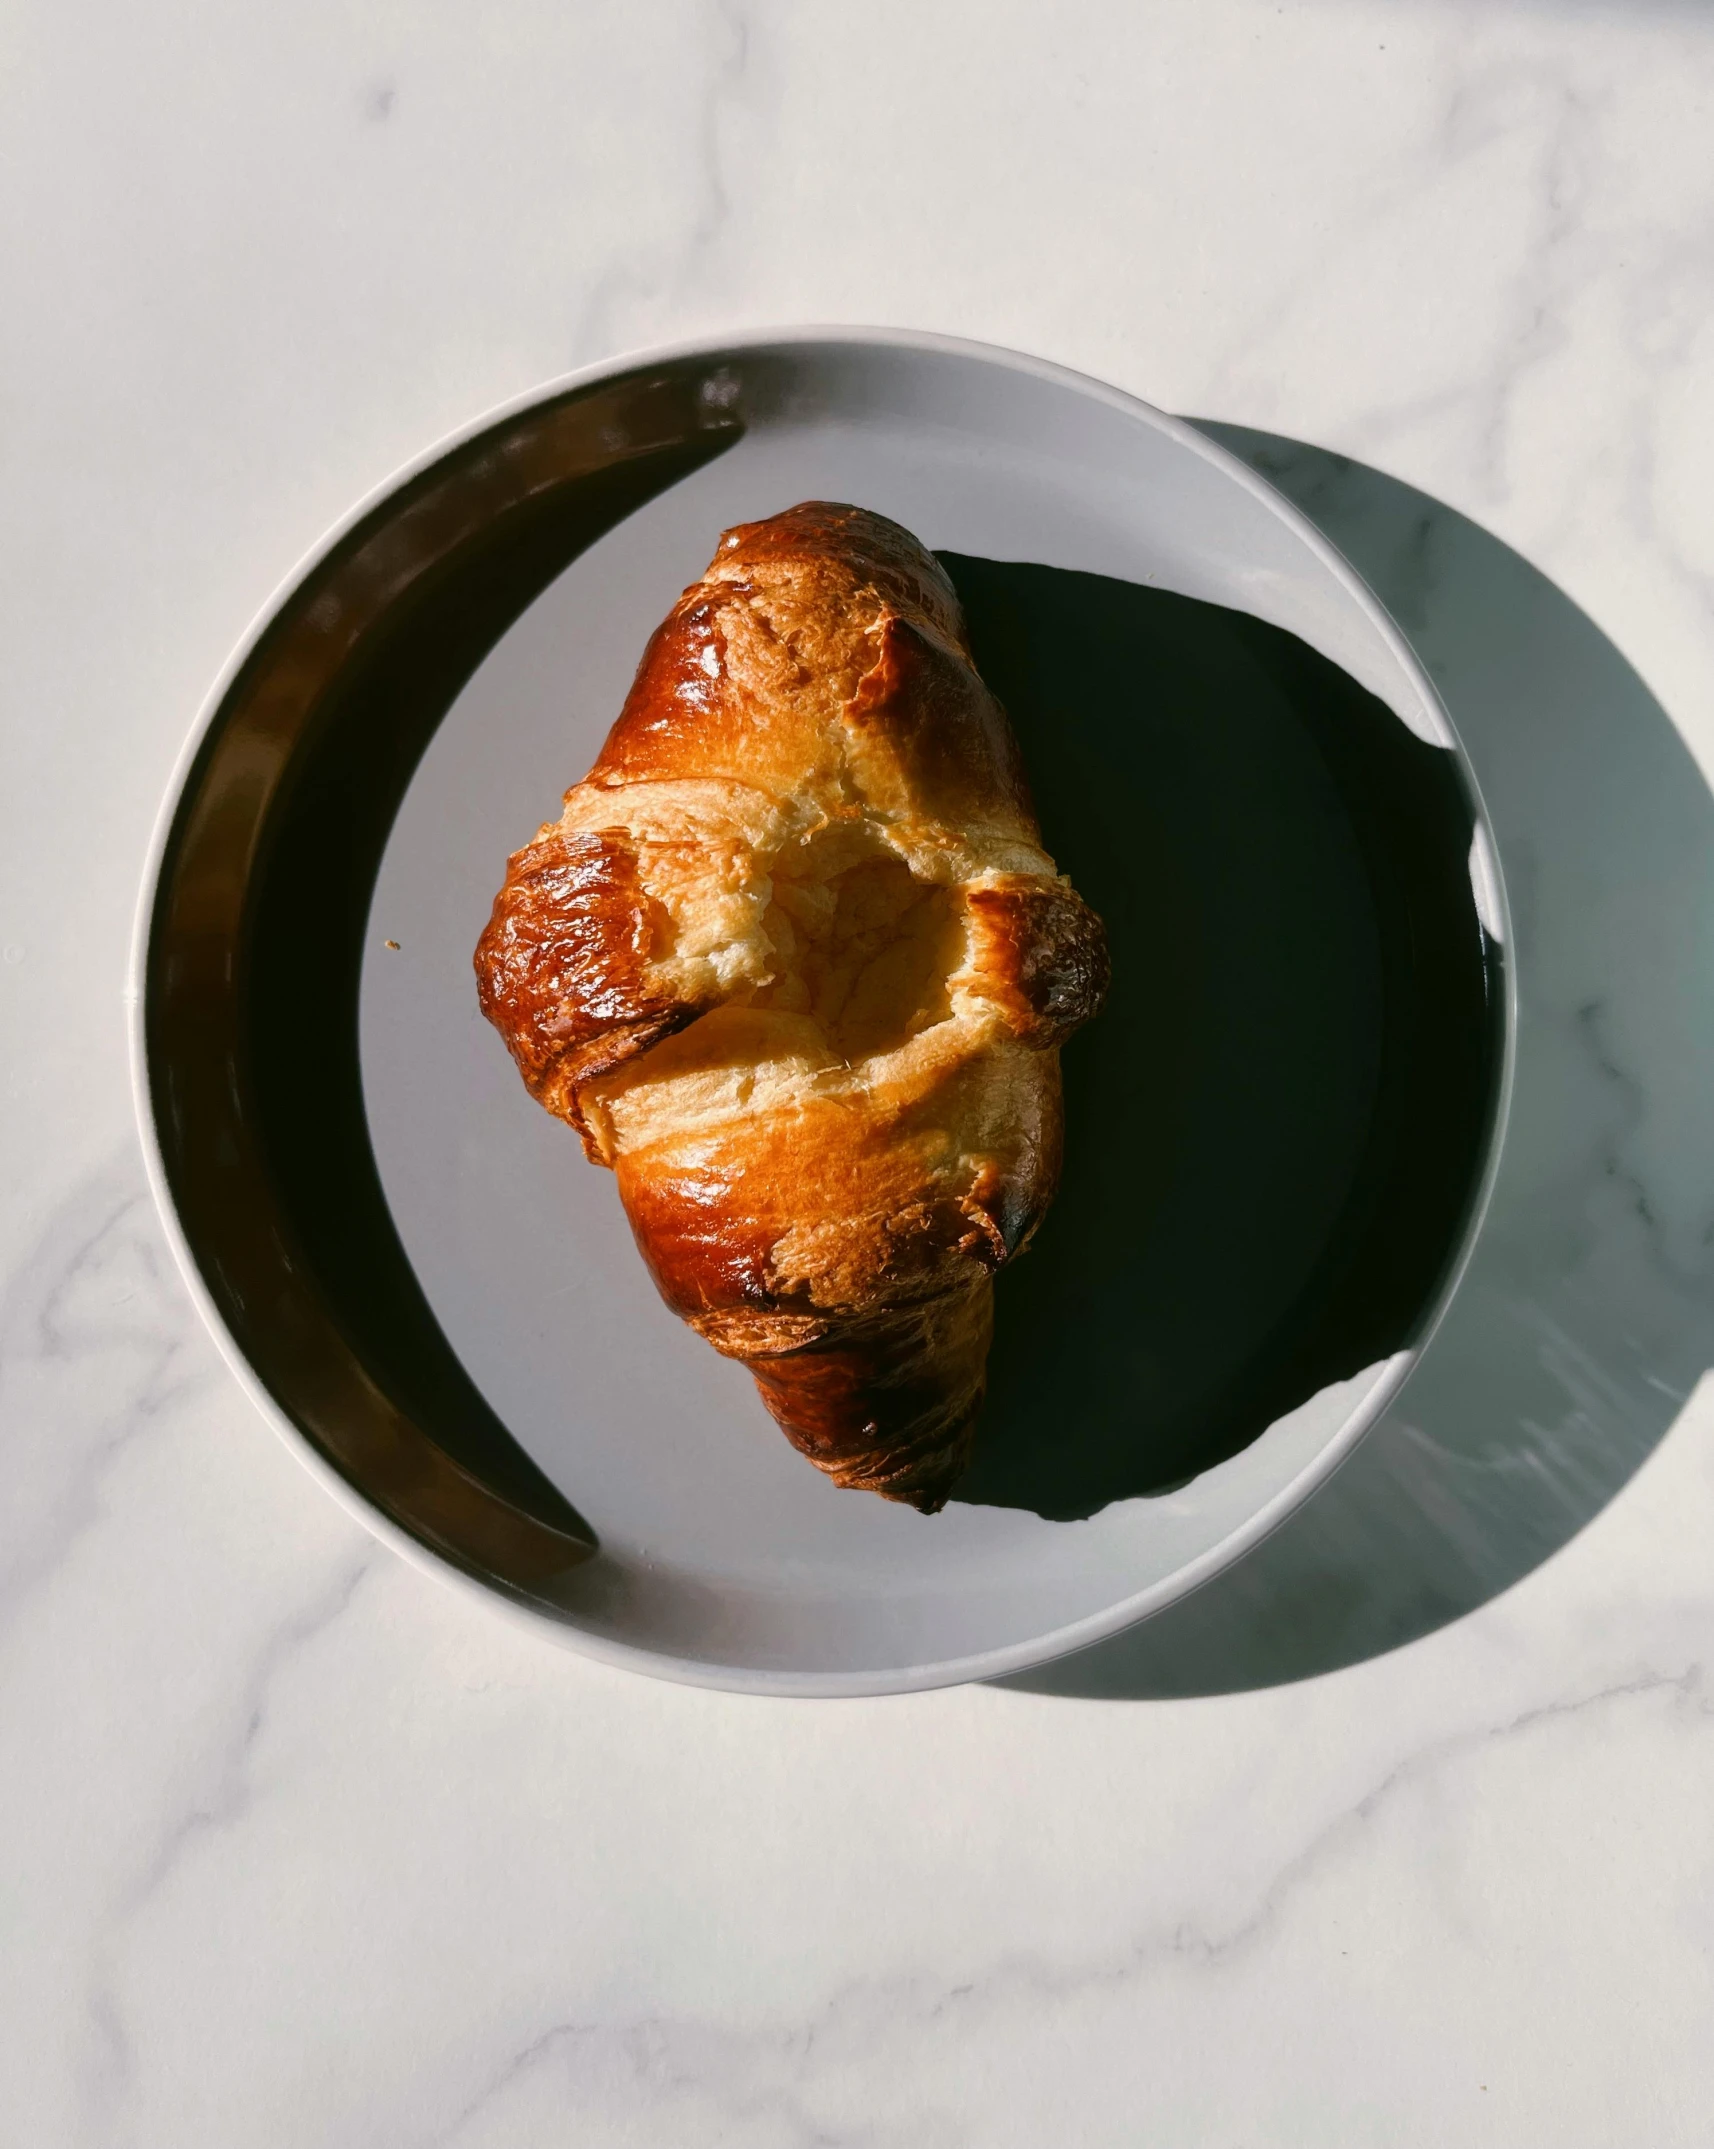 a croissant is placed on a plate ready to be eaten